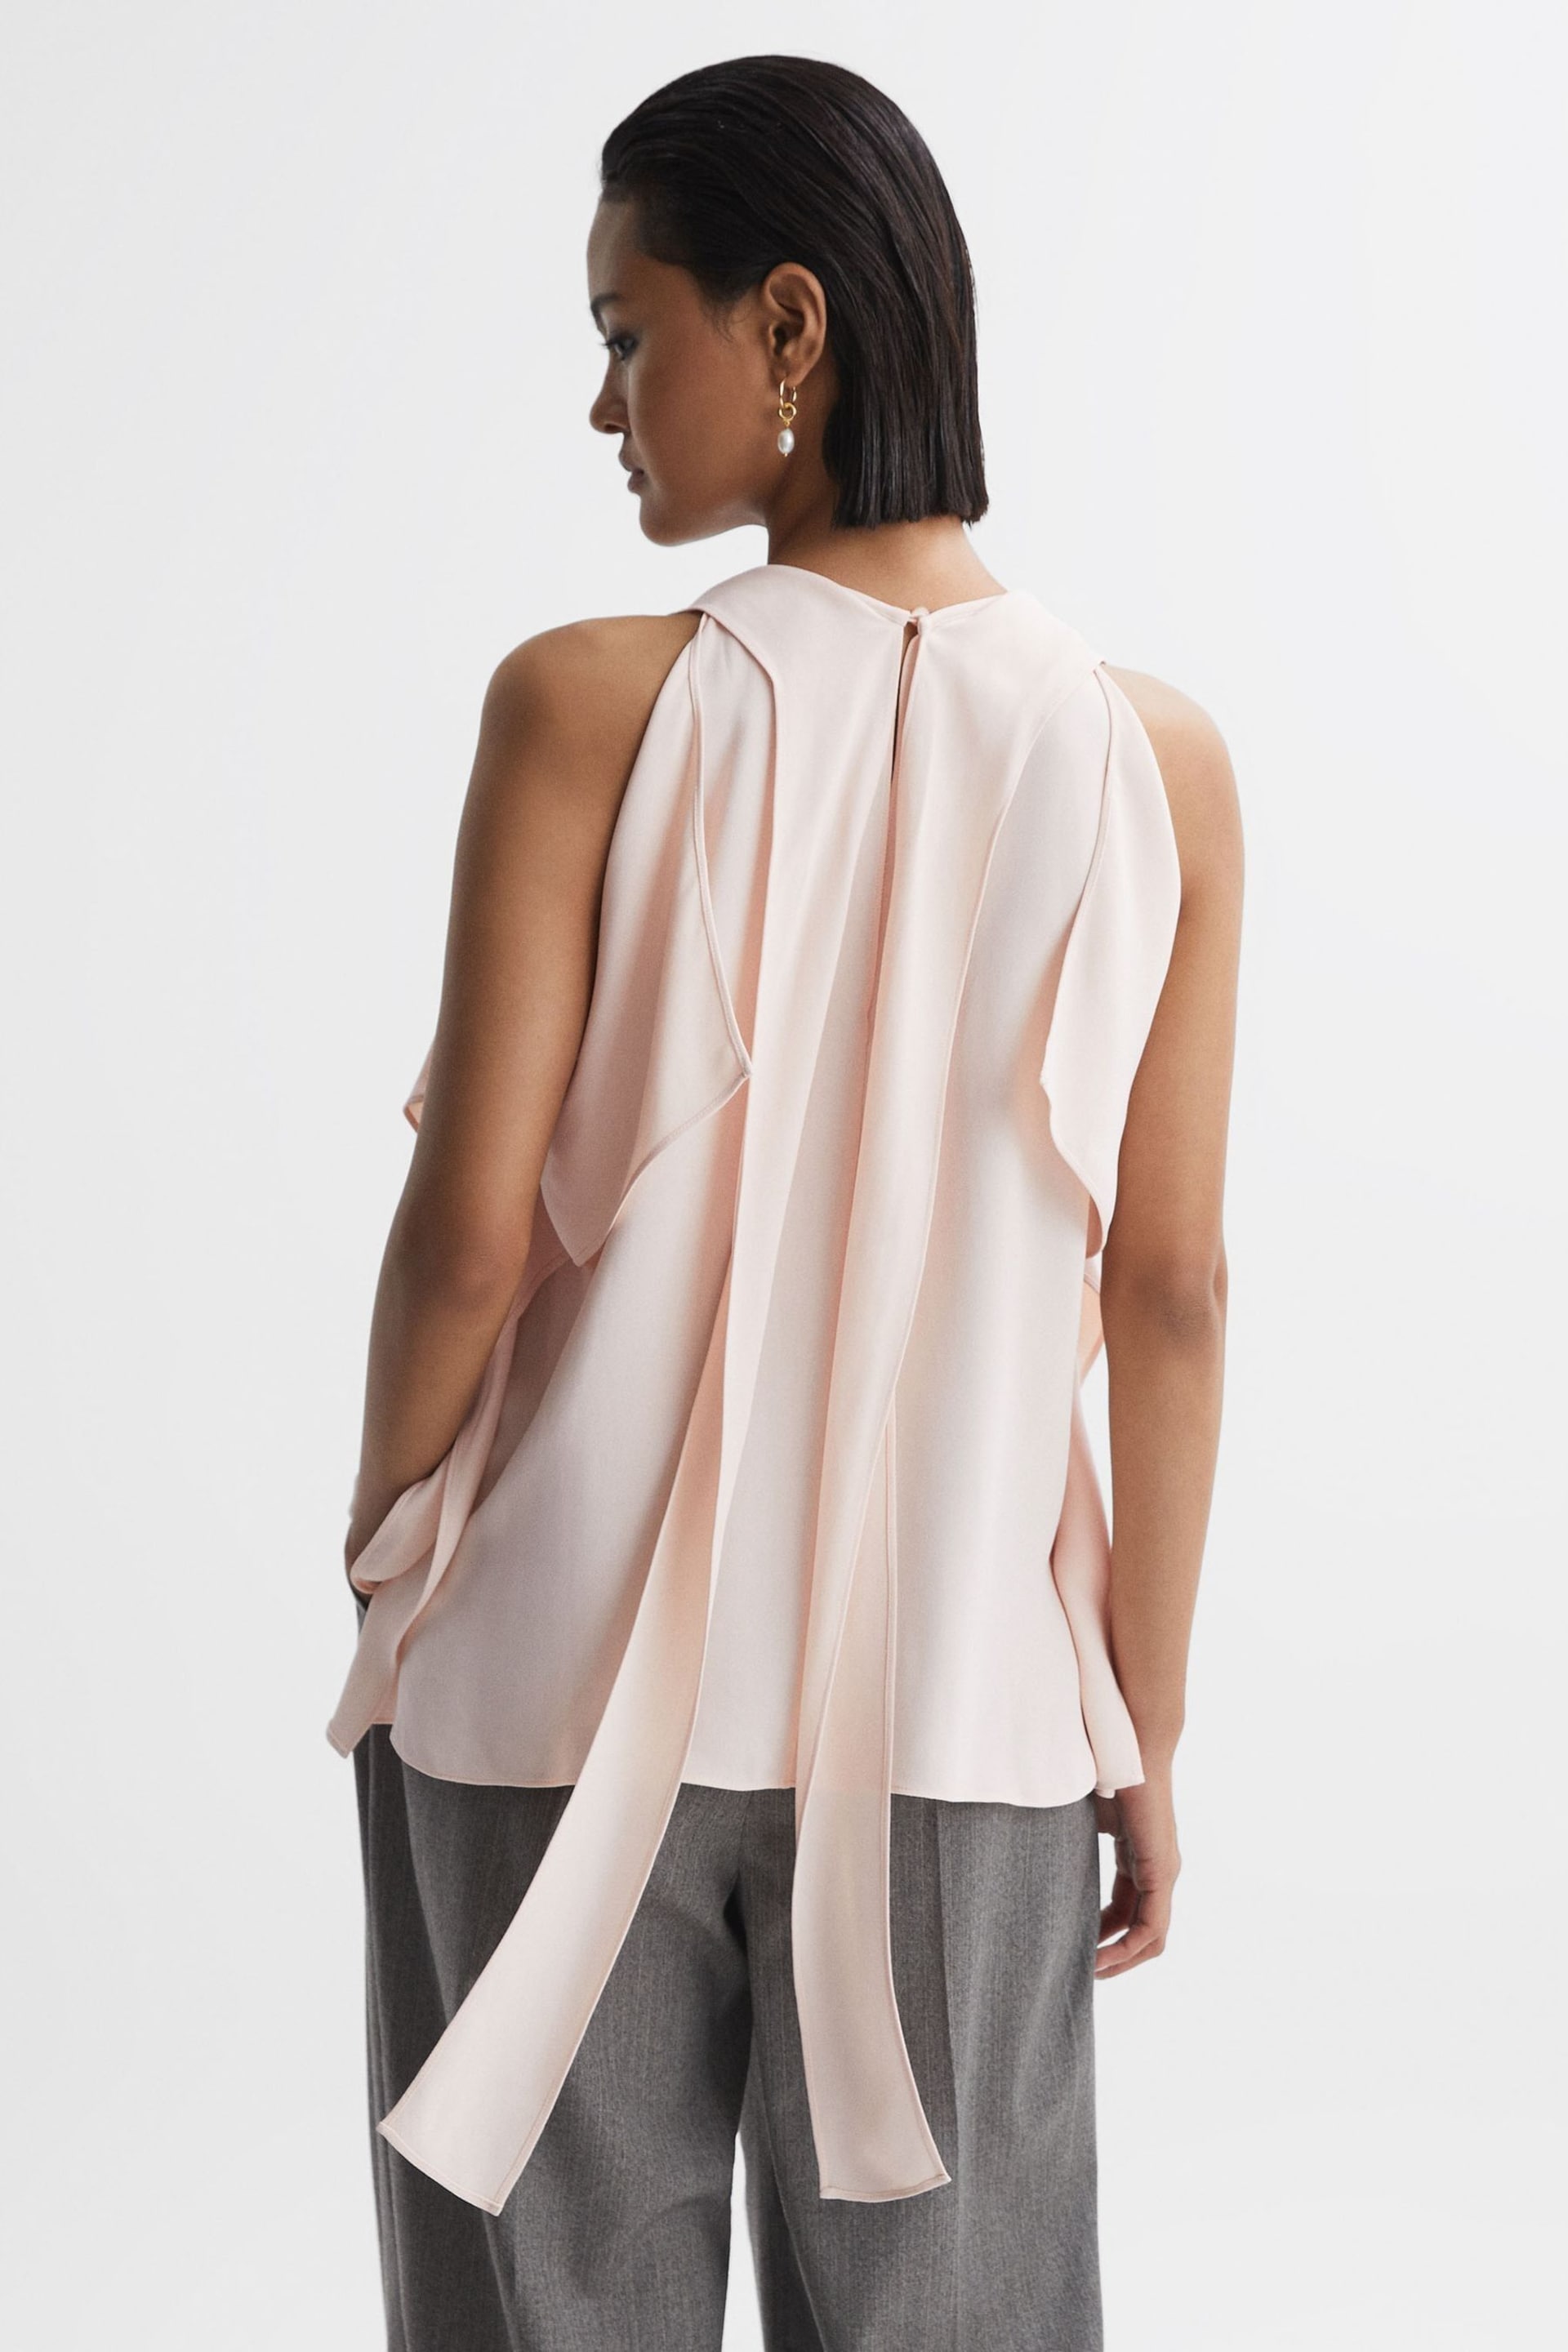 Reiss Nude Calista Tie Neck Draped Blouse - Image 4 of 5